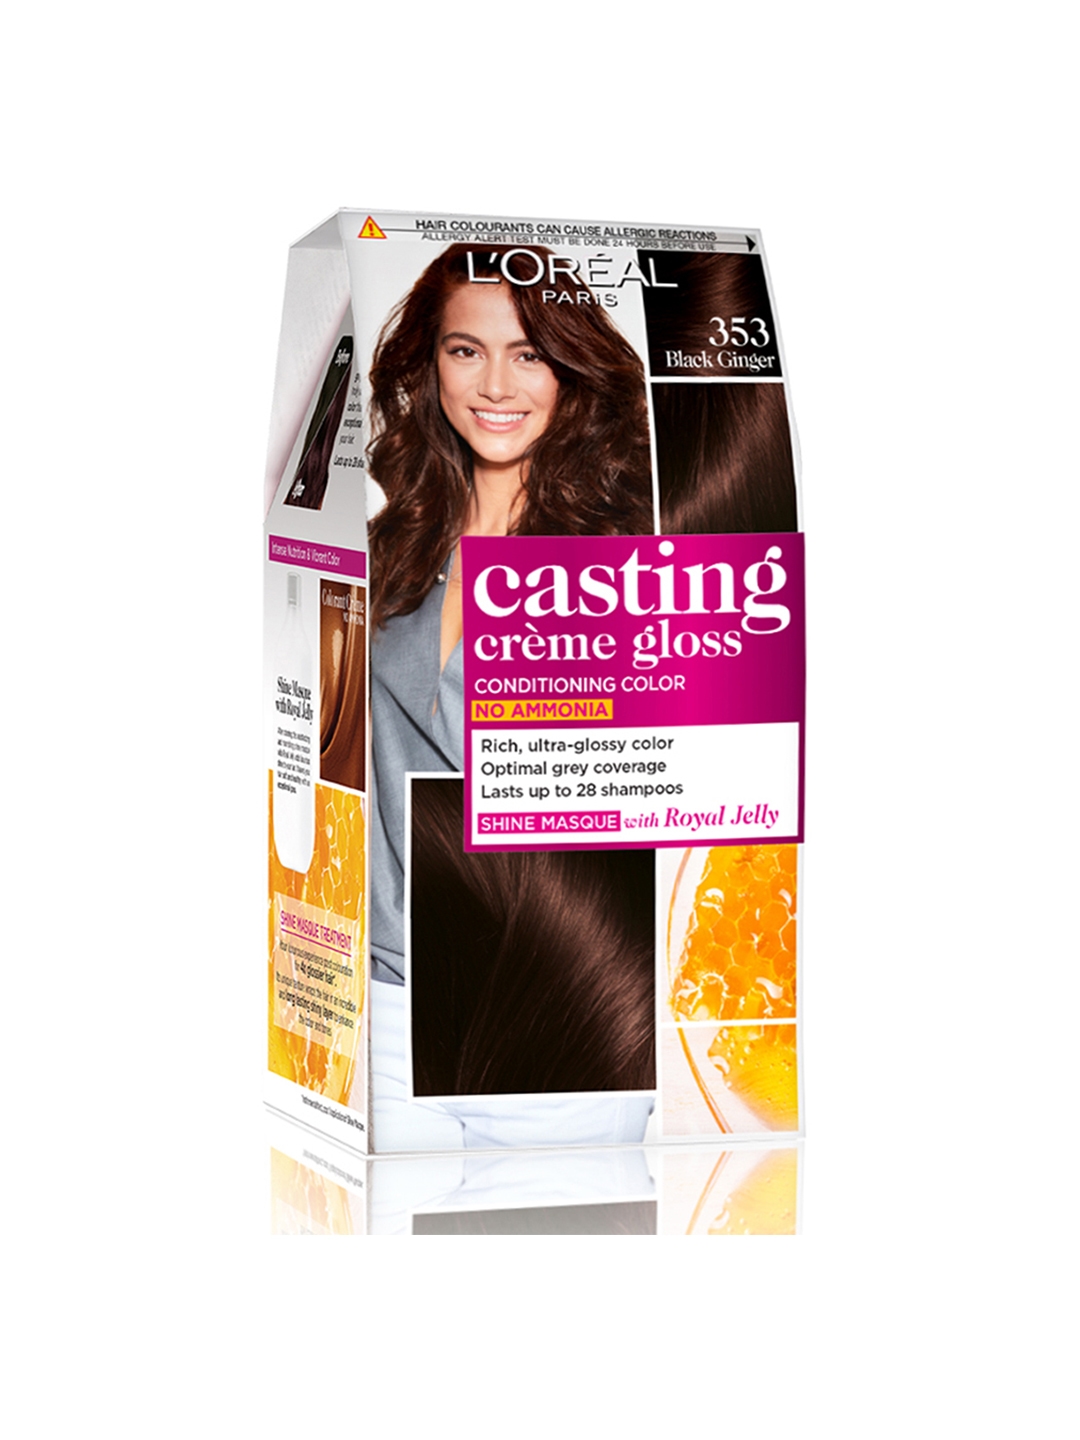 How to Color Your Hair with L'Oreal Paris Casting Creme Gloss? : Tutorial,  Photos and Steps!